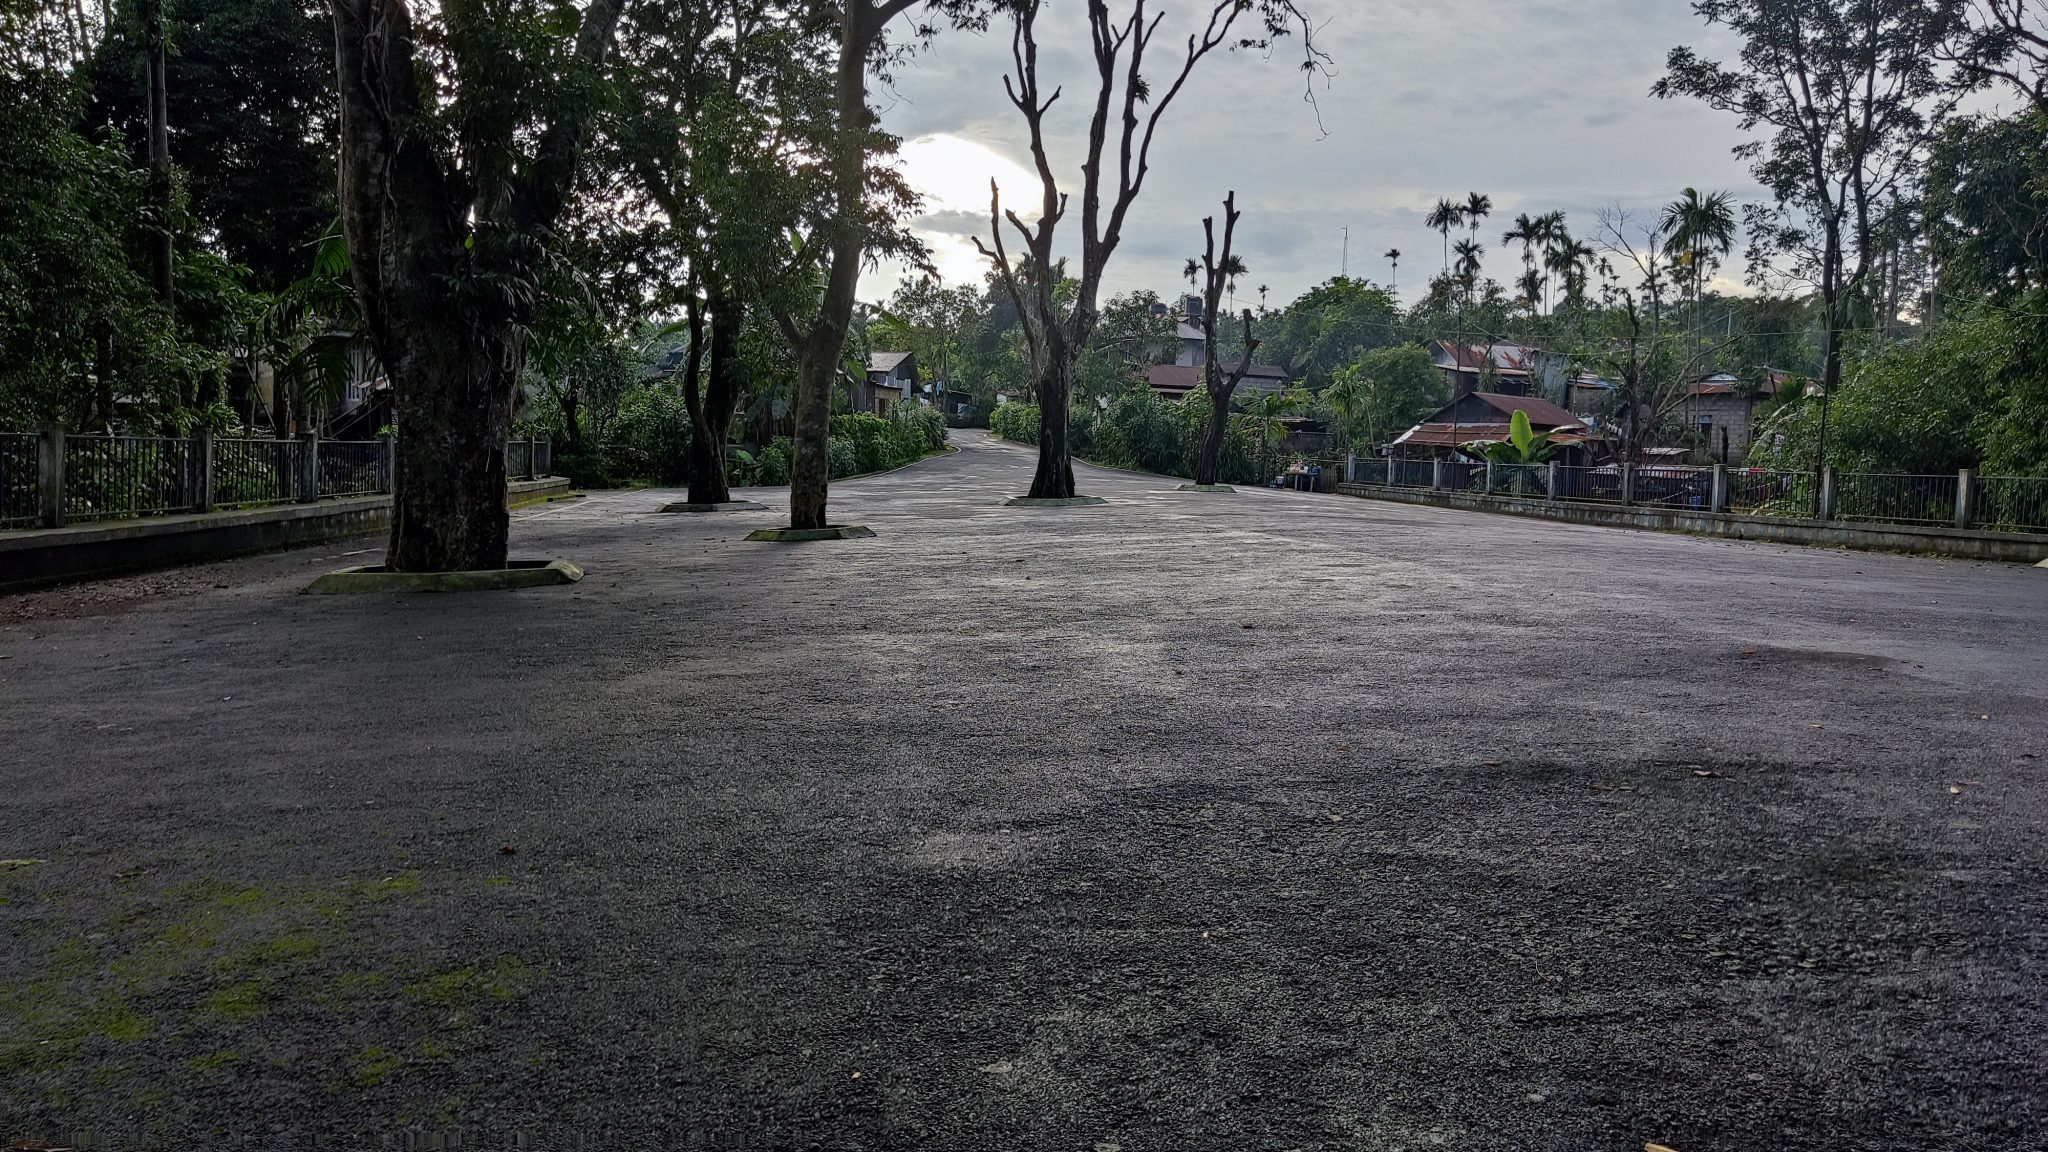 Mawlynnong, the Cleanest village in the Asia.